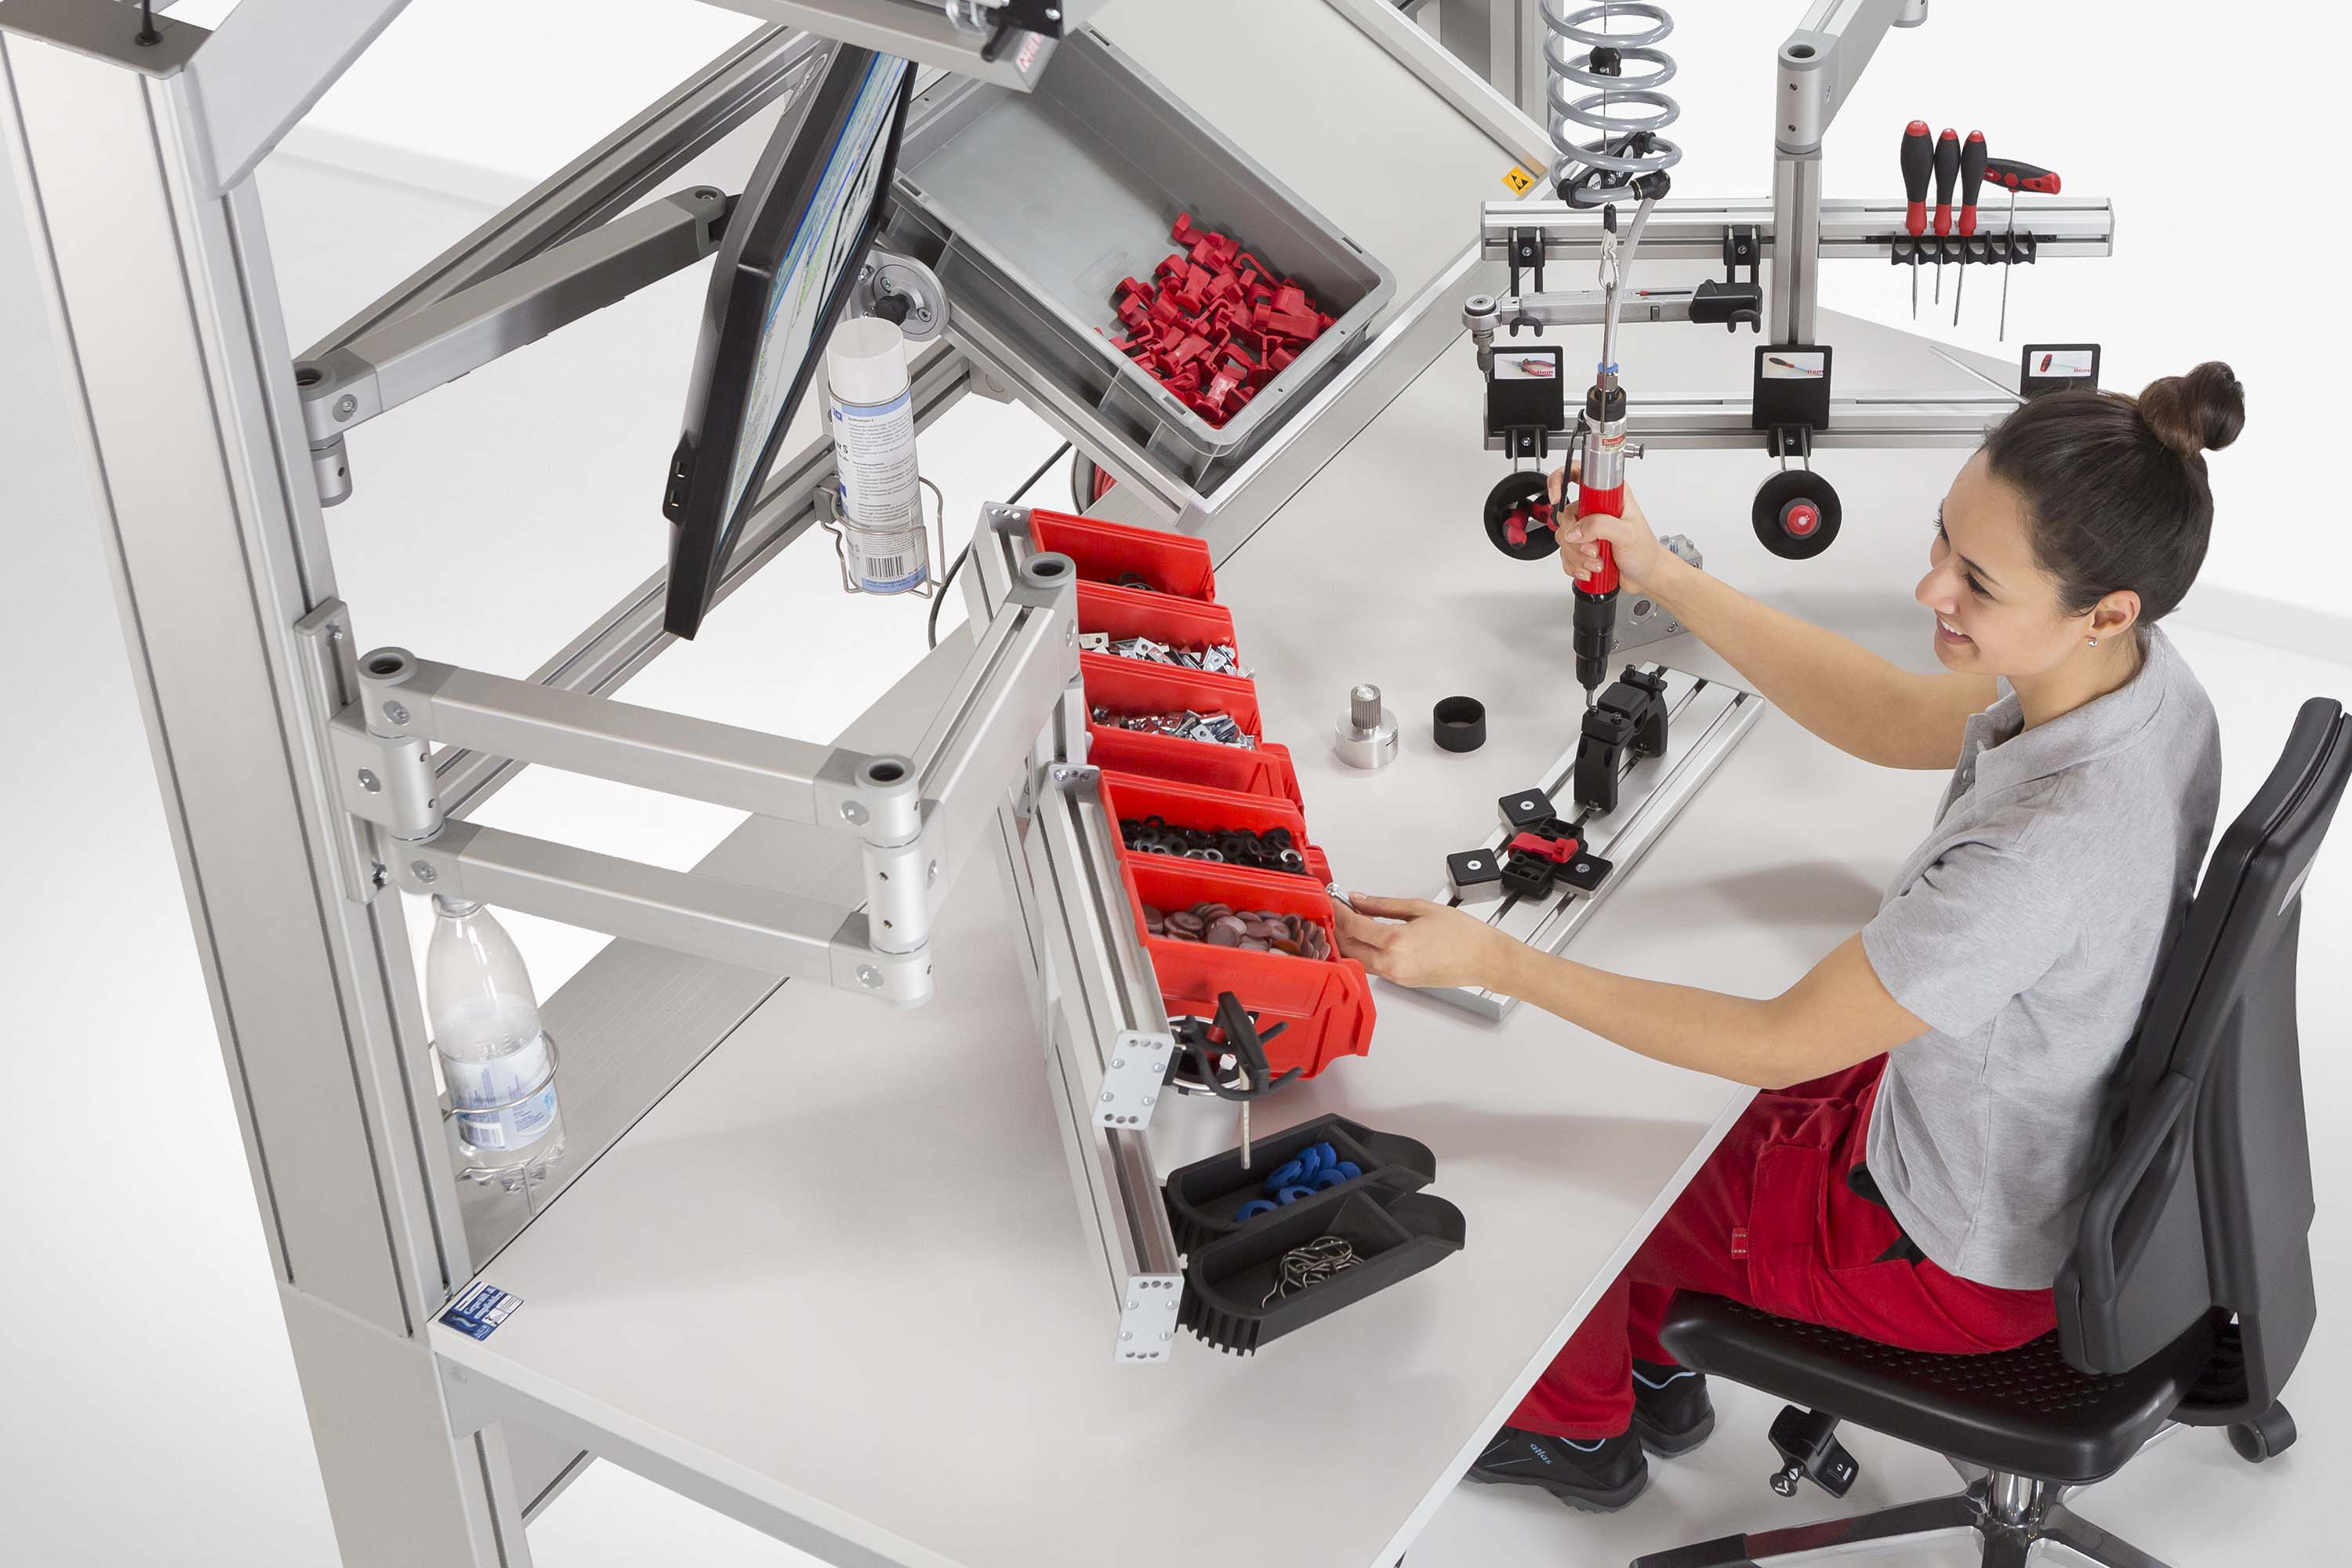 Work bench ergonomics – find your balance, strengthen your back!